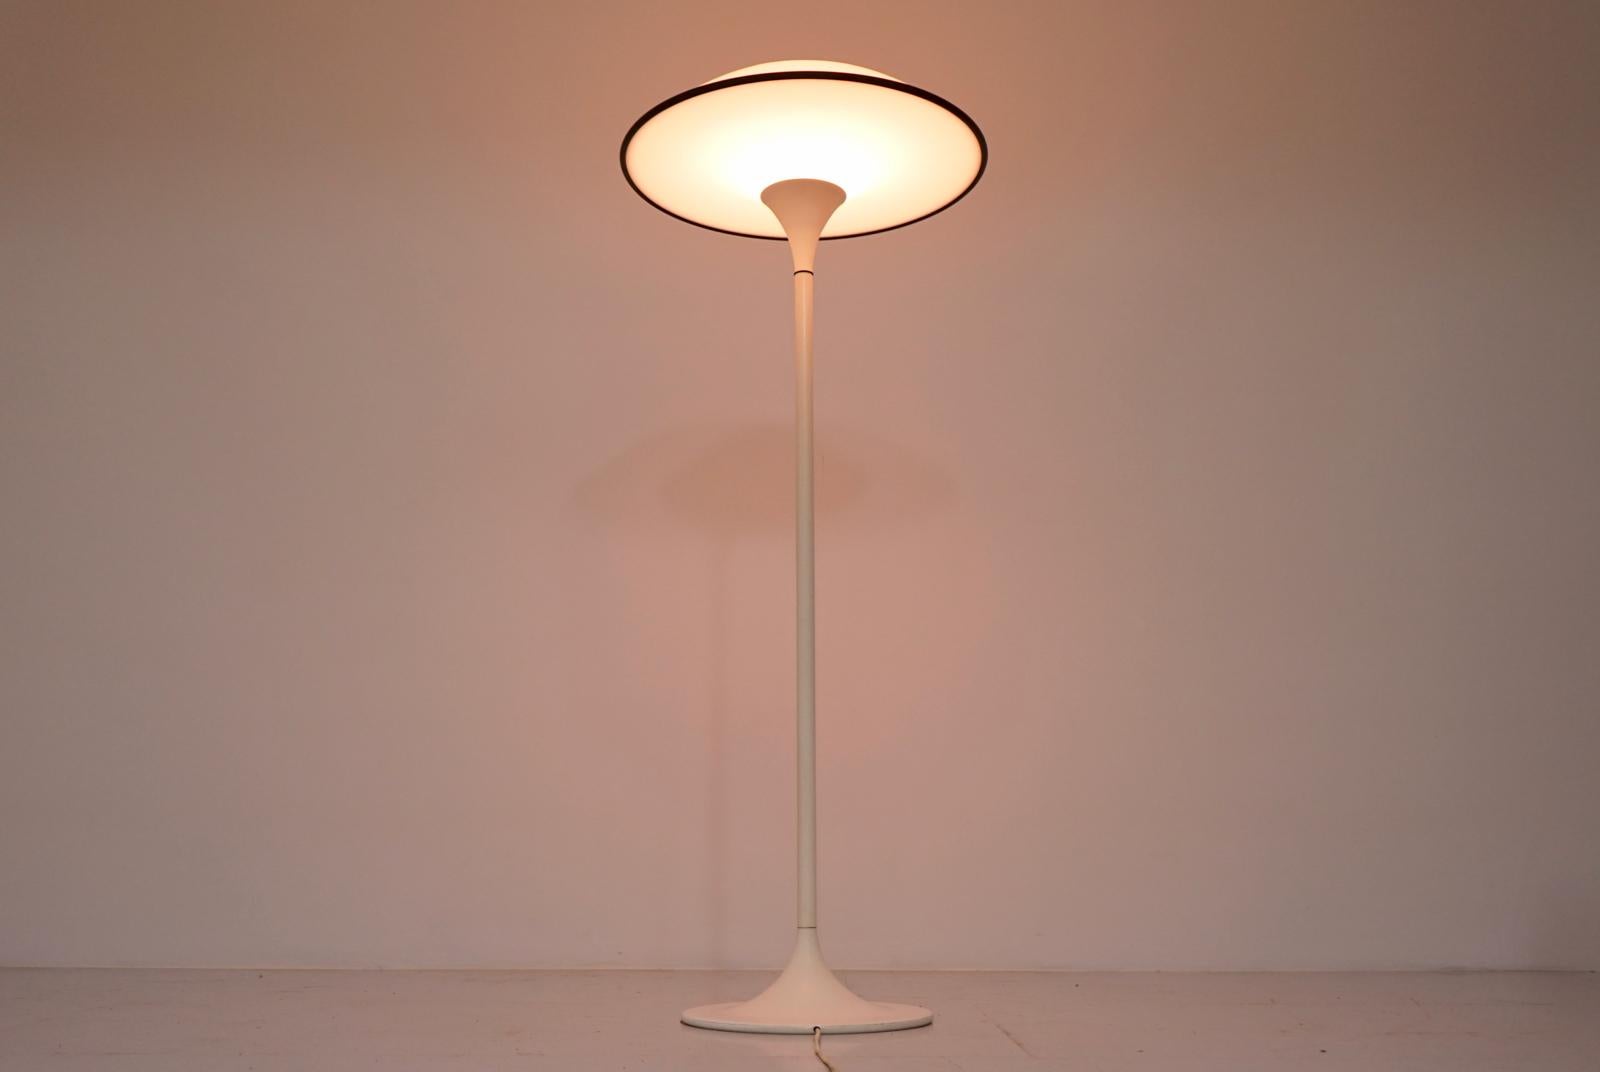 Rare floor lamp by Fog and Mørup, Denmark, 1960s. Tulip base and a white plastic shade. Very good condition without damage.
Please also note the matching pendant lamp from the same series that we have in stock
Dimensions: Height 51.18 in. (130